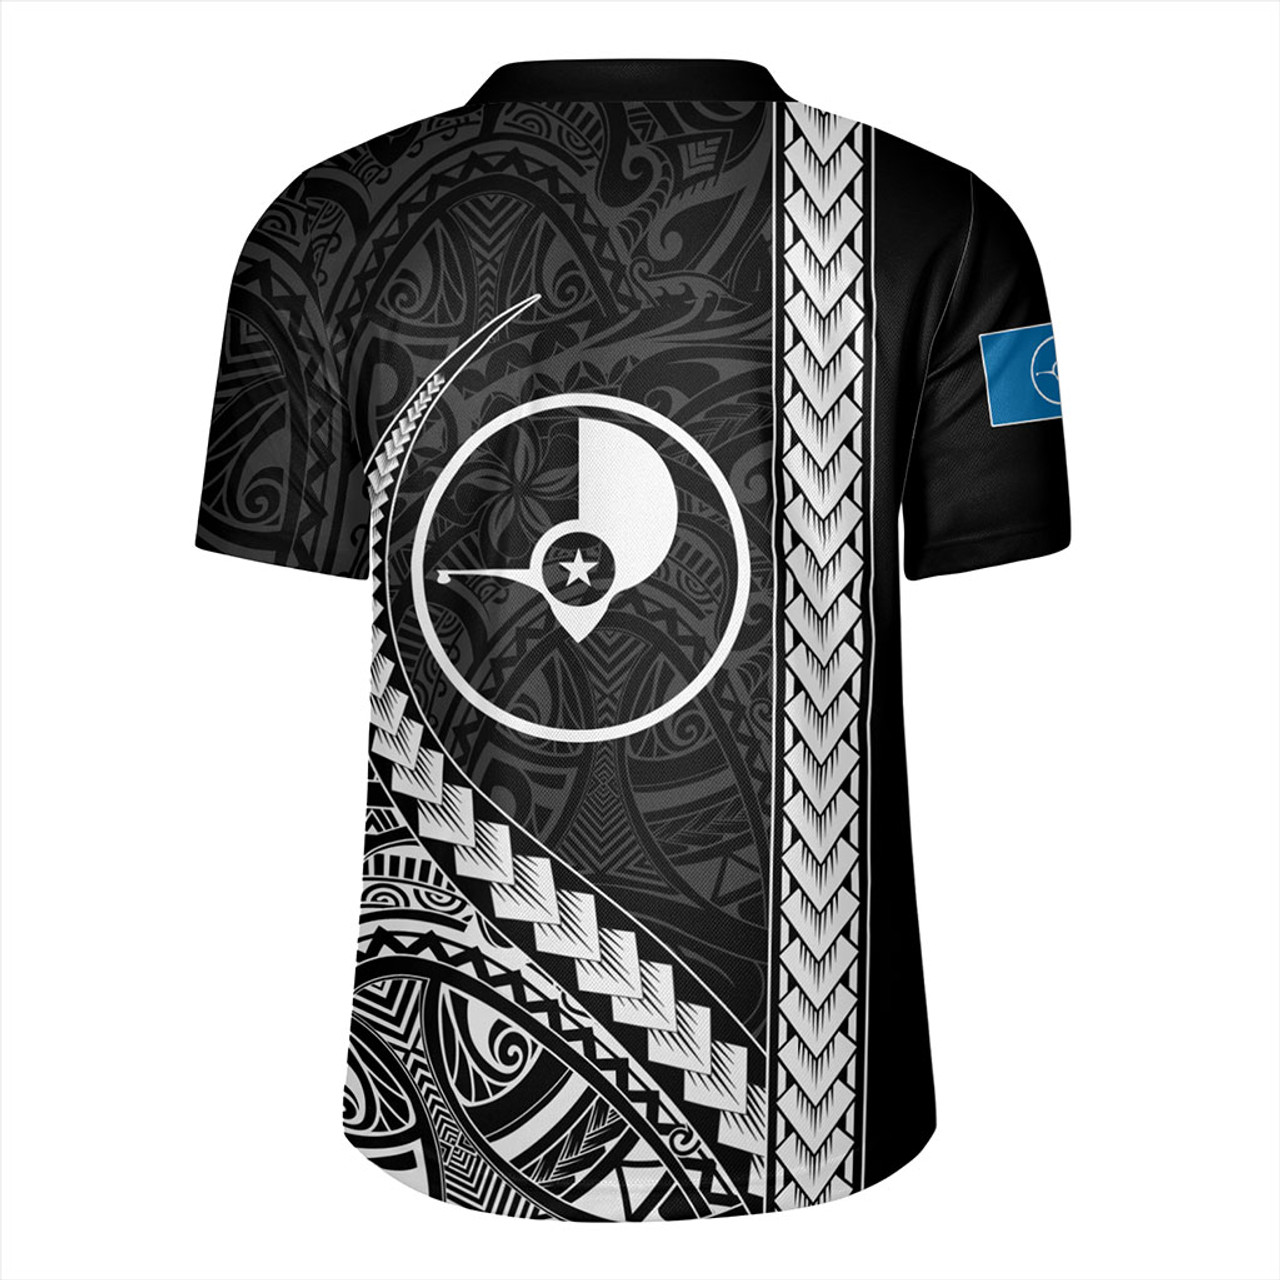 Yap State Rugby Jersey Tribal Micronesian Coat Of Arms